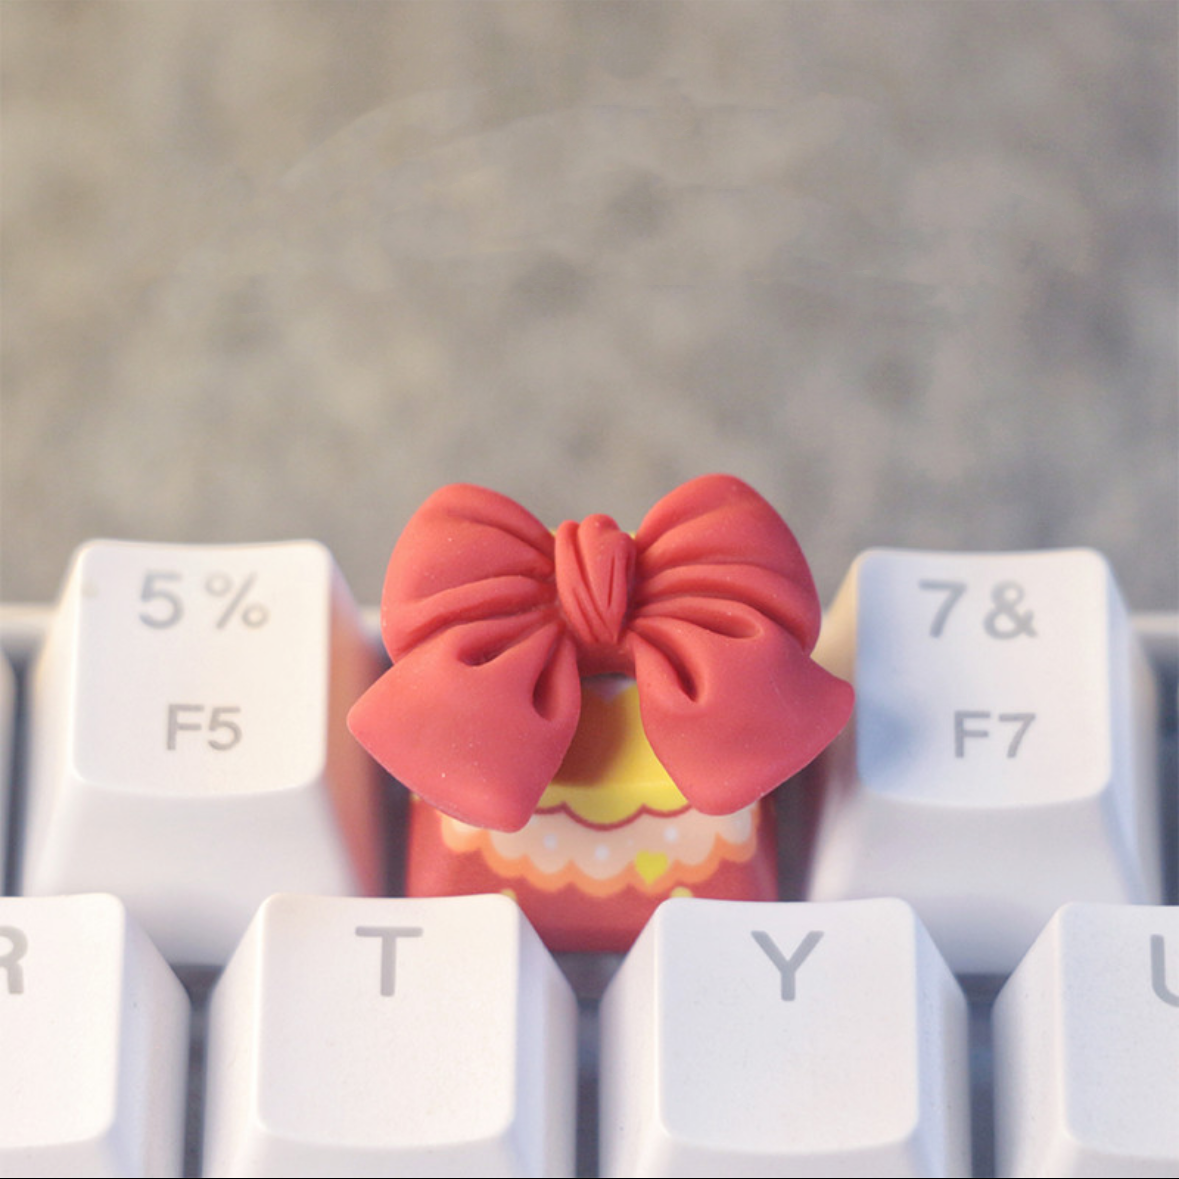 "Elevate your keyboard's style with our unique Bow Tie Custom Artisan Keycaps from AIHey Studio. Handcrafted with attention to detail, these keycaps are designed to add a touch of elegance to your setup. Each keycap features a bow tie design, making a fashion statement while you type. From AIHey Studio, known for the best artisan keycaps, these are the epitome of craftsmanship and style. Stand out from the crowd with these one-of-a-kind artisan keycaps." 🎩💻 #KeyboardAccessories #ArtisanKeycaps #BowTieDesign